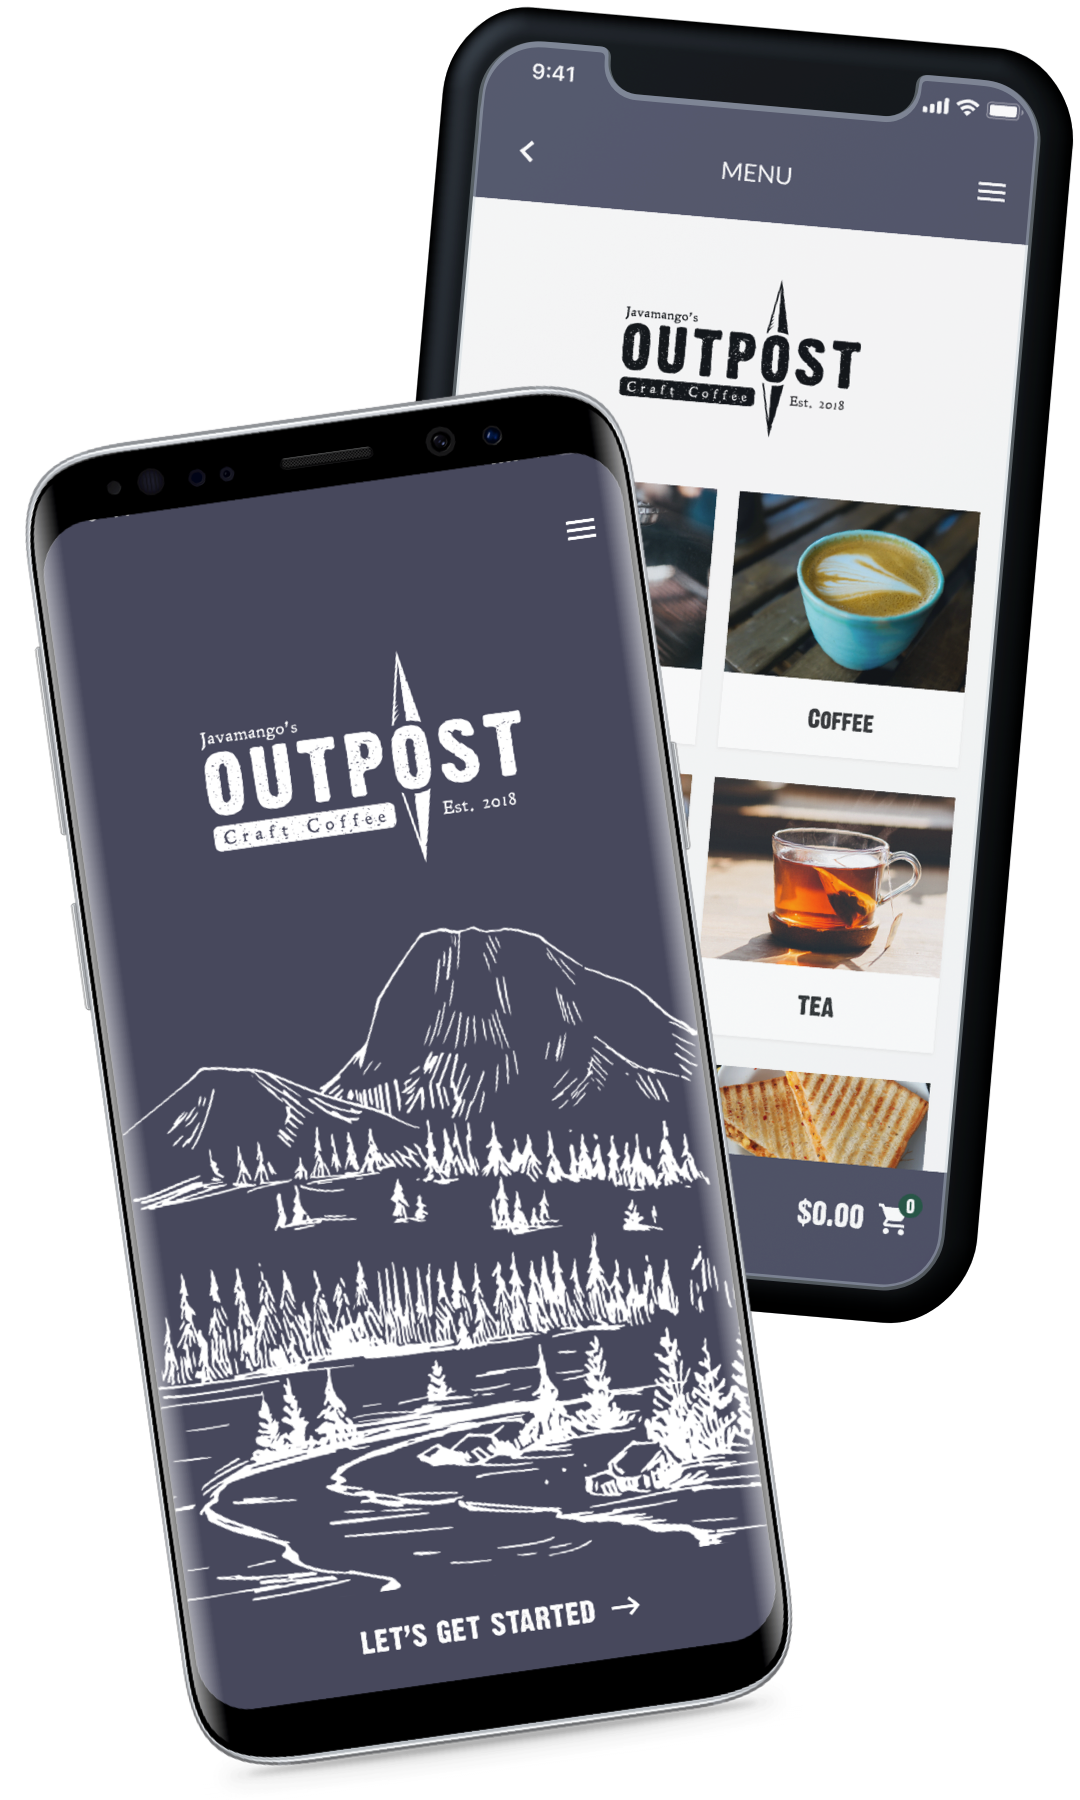 Two iPhones showing the The Outpost app.